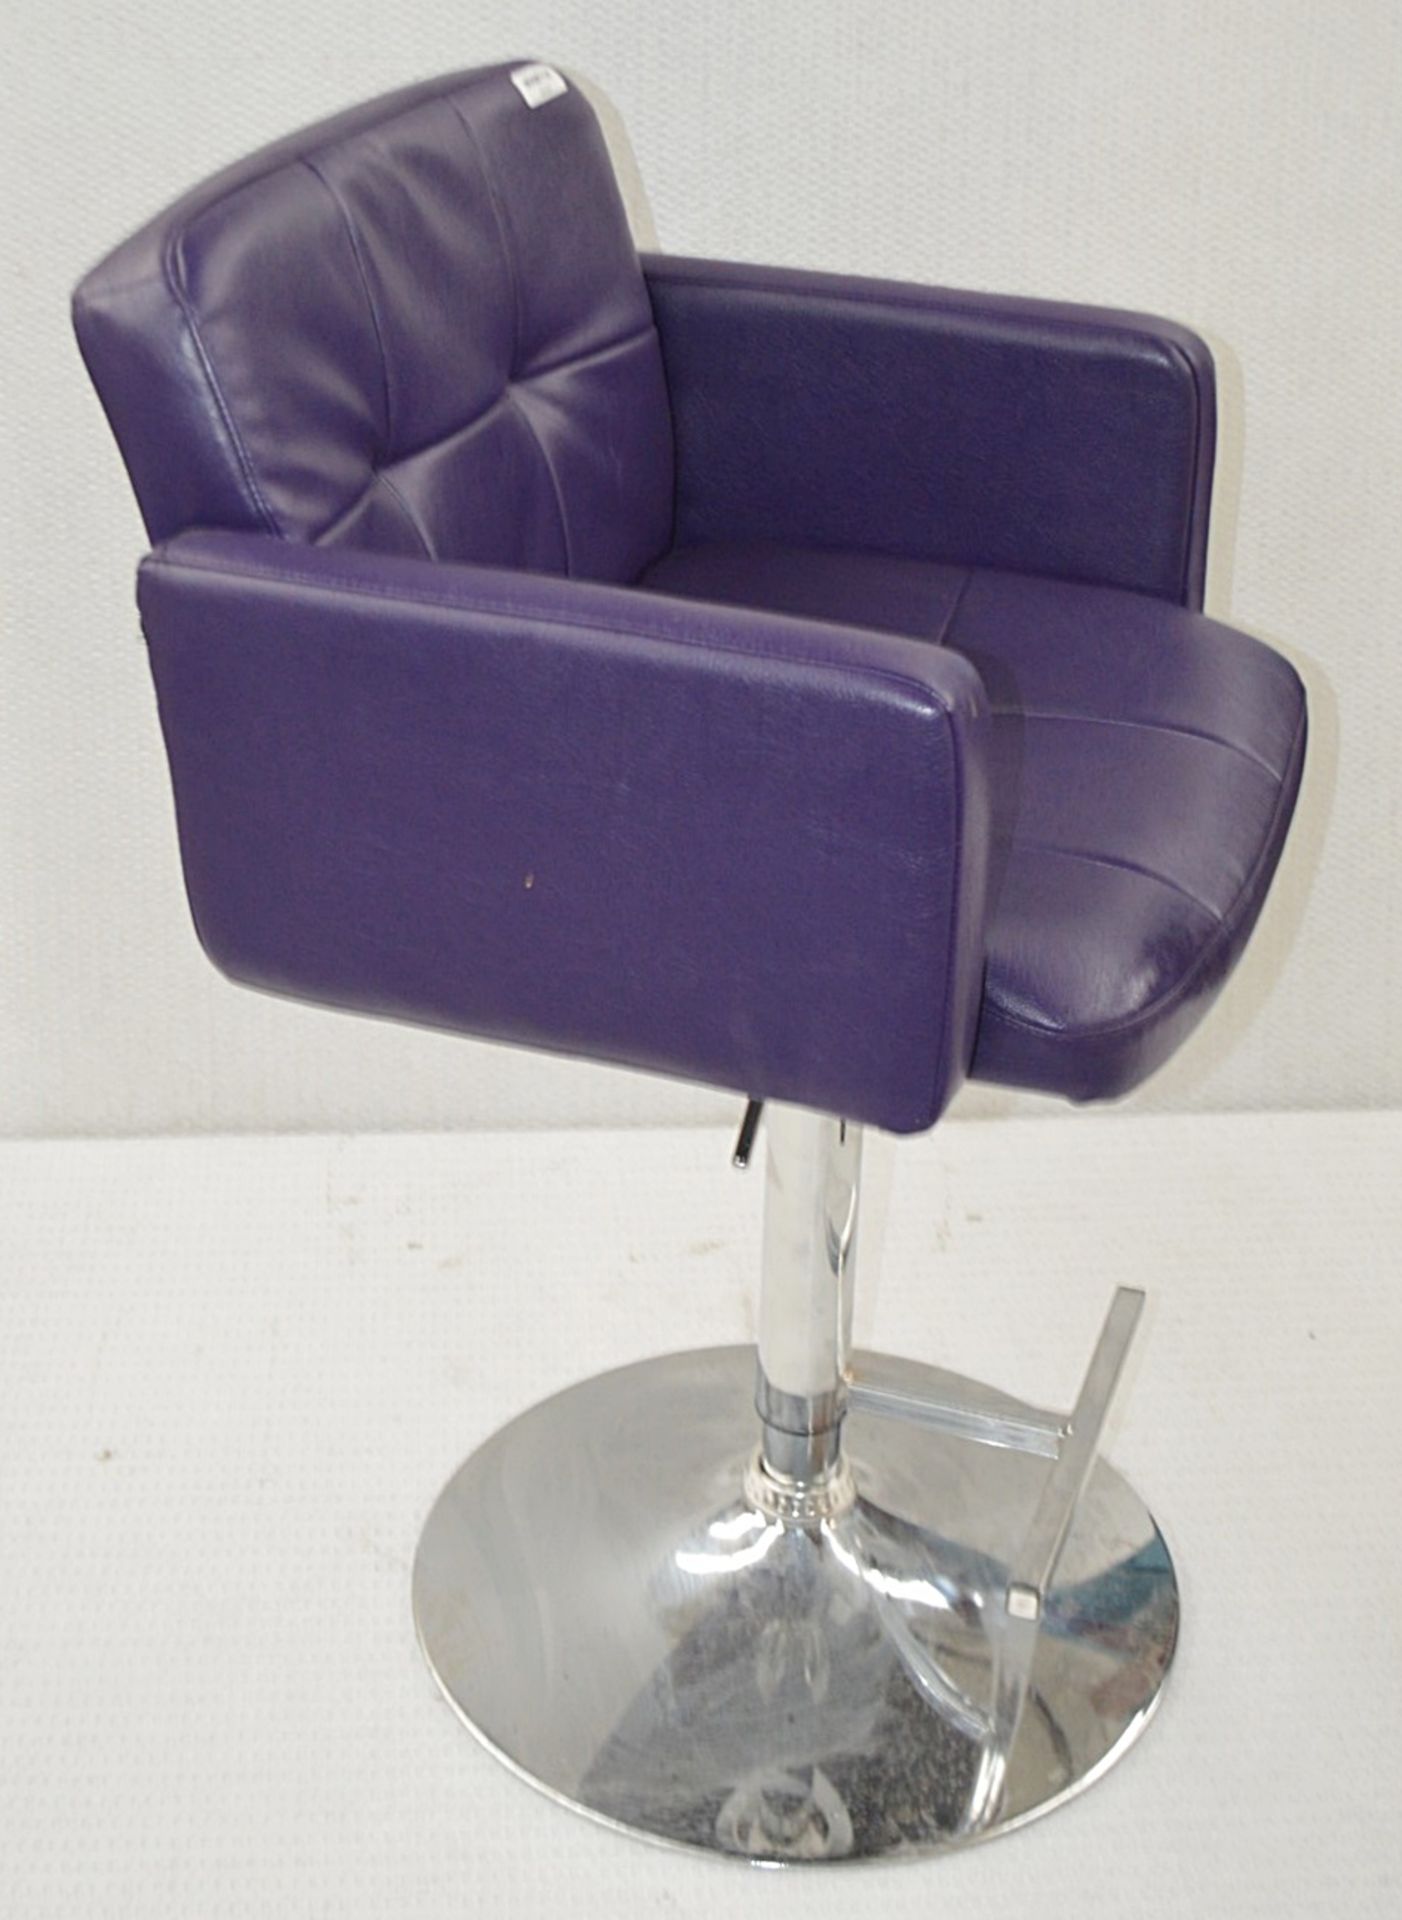 1 x URBAN DECAY Branded Gas-Lift Beauty Salon Swivel Chair With Foot Plate - Upholstered In Purple - Image 5 of 6